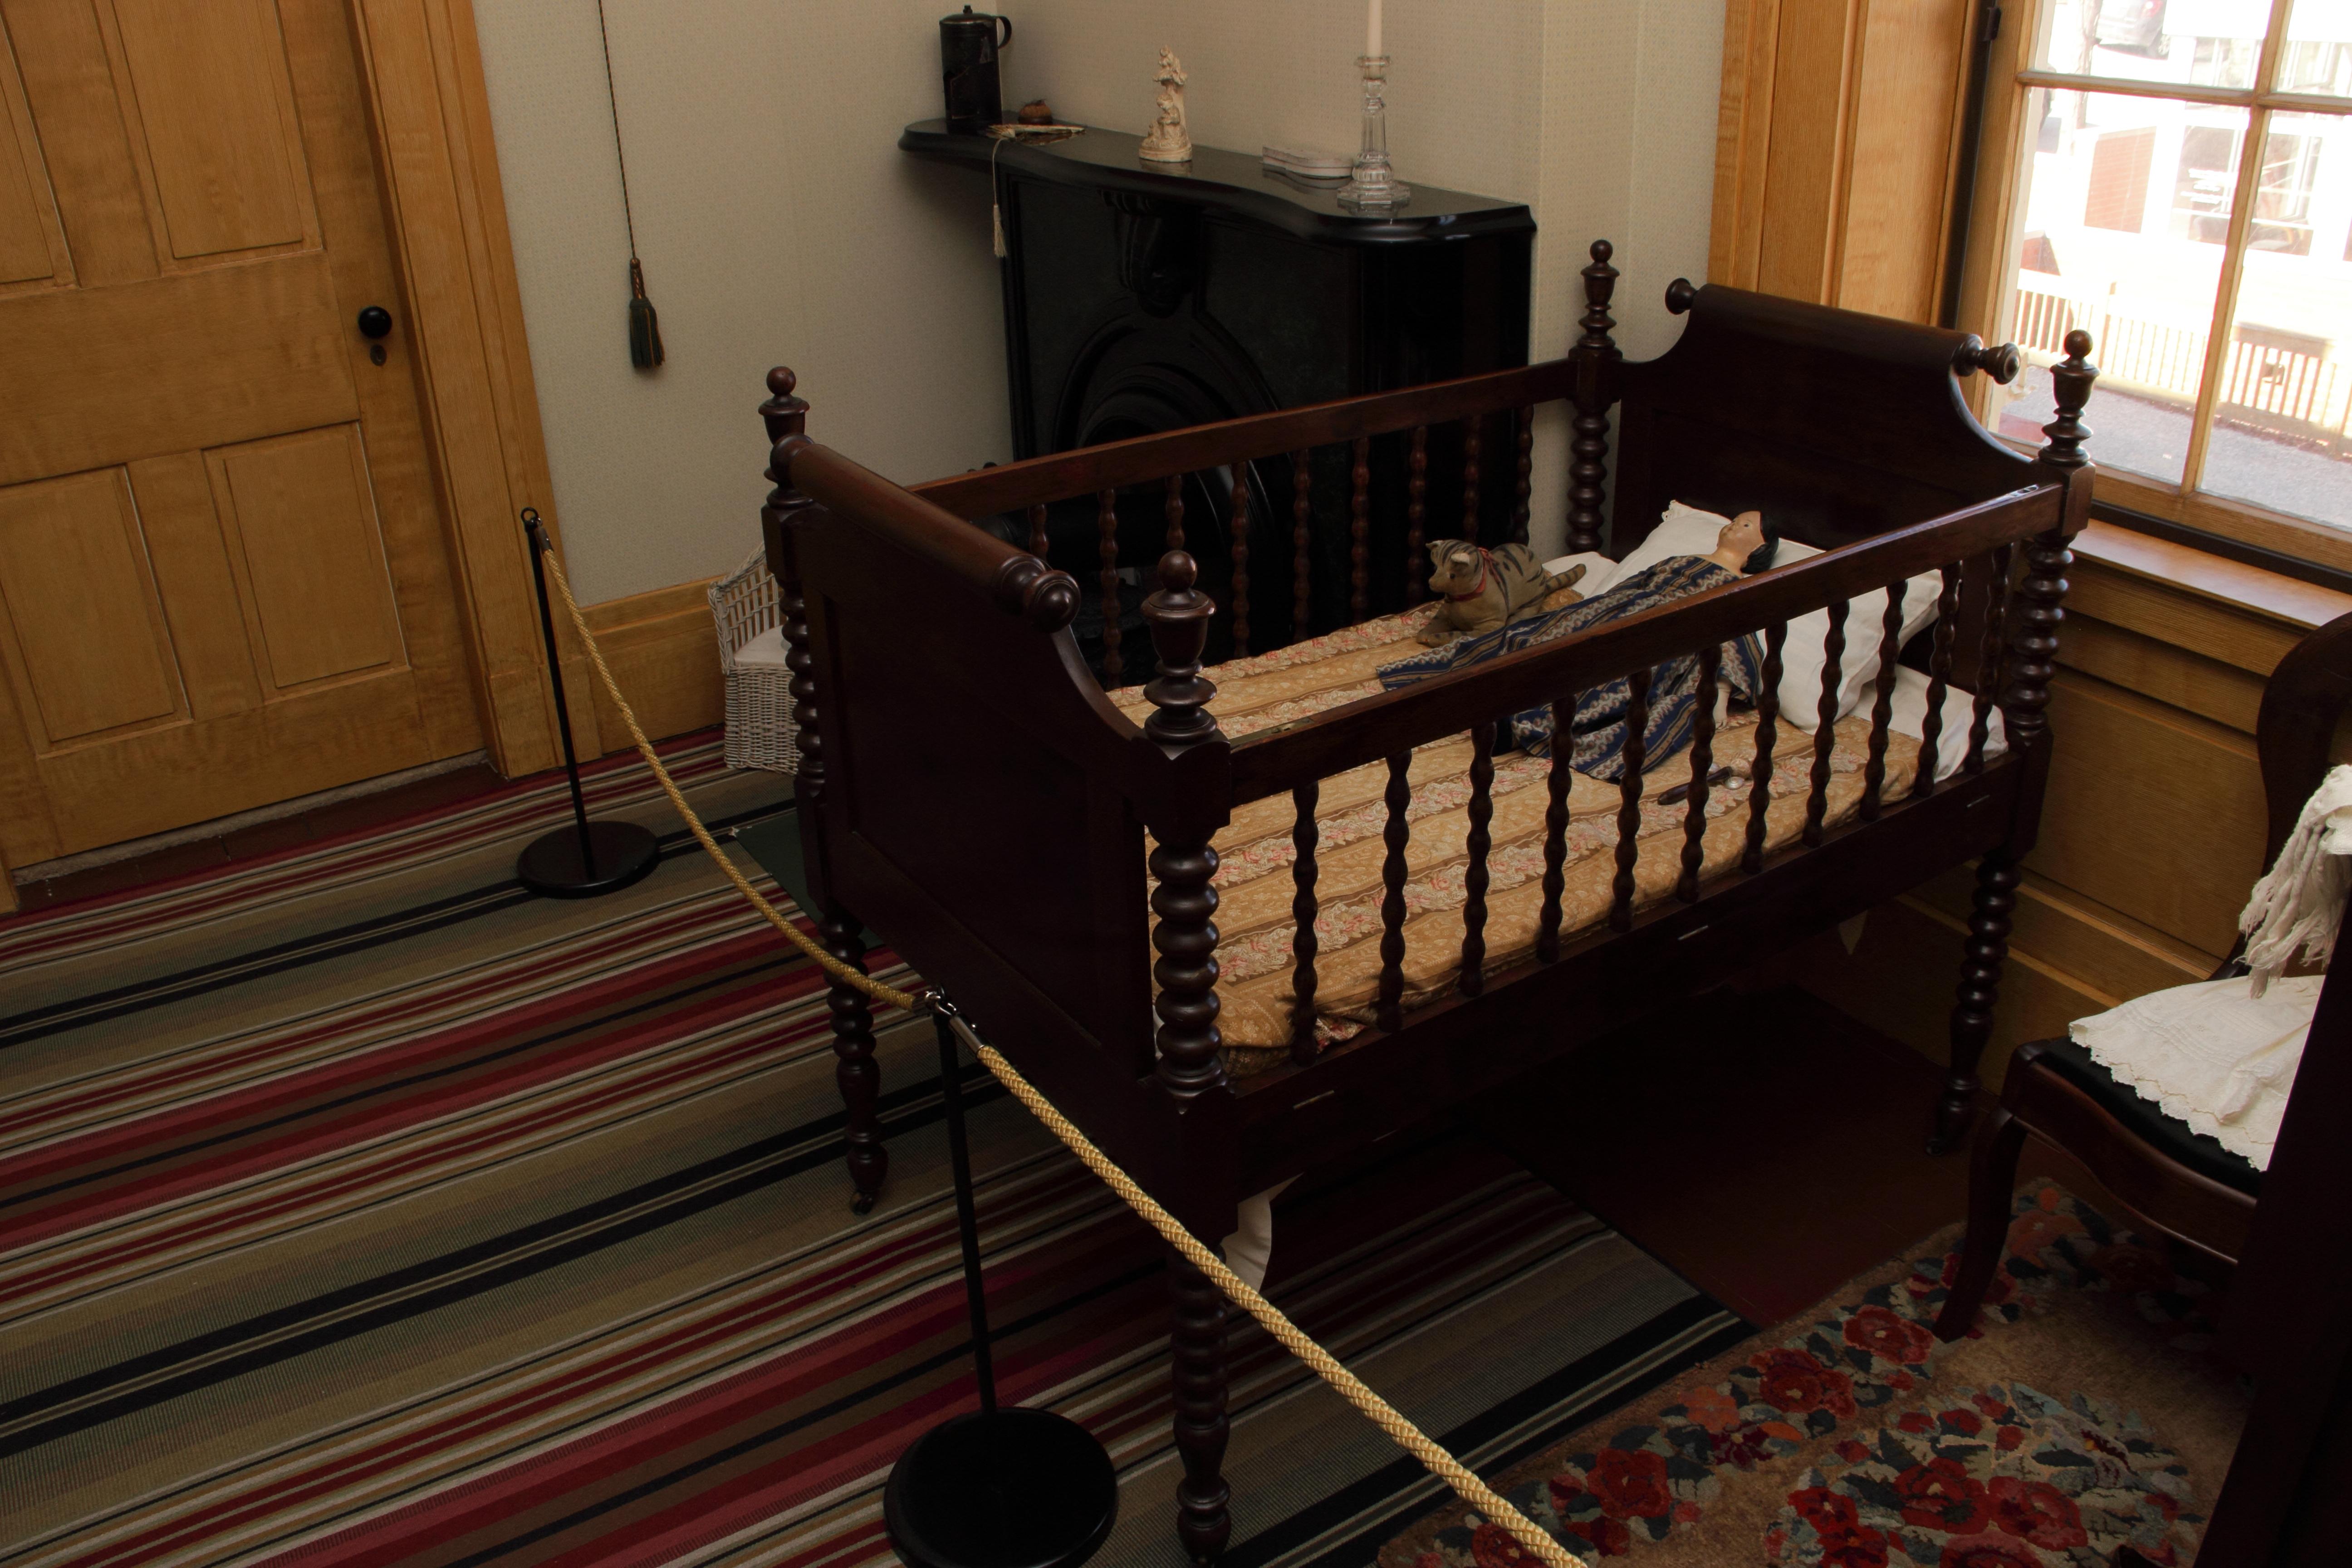 A dark wooden baby crib with wooden spindles sits inside of a bedroom.